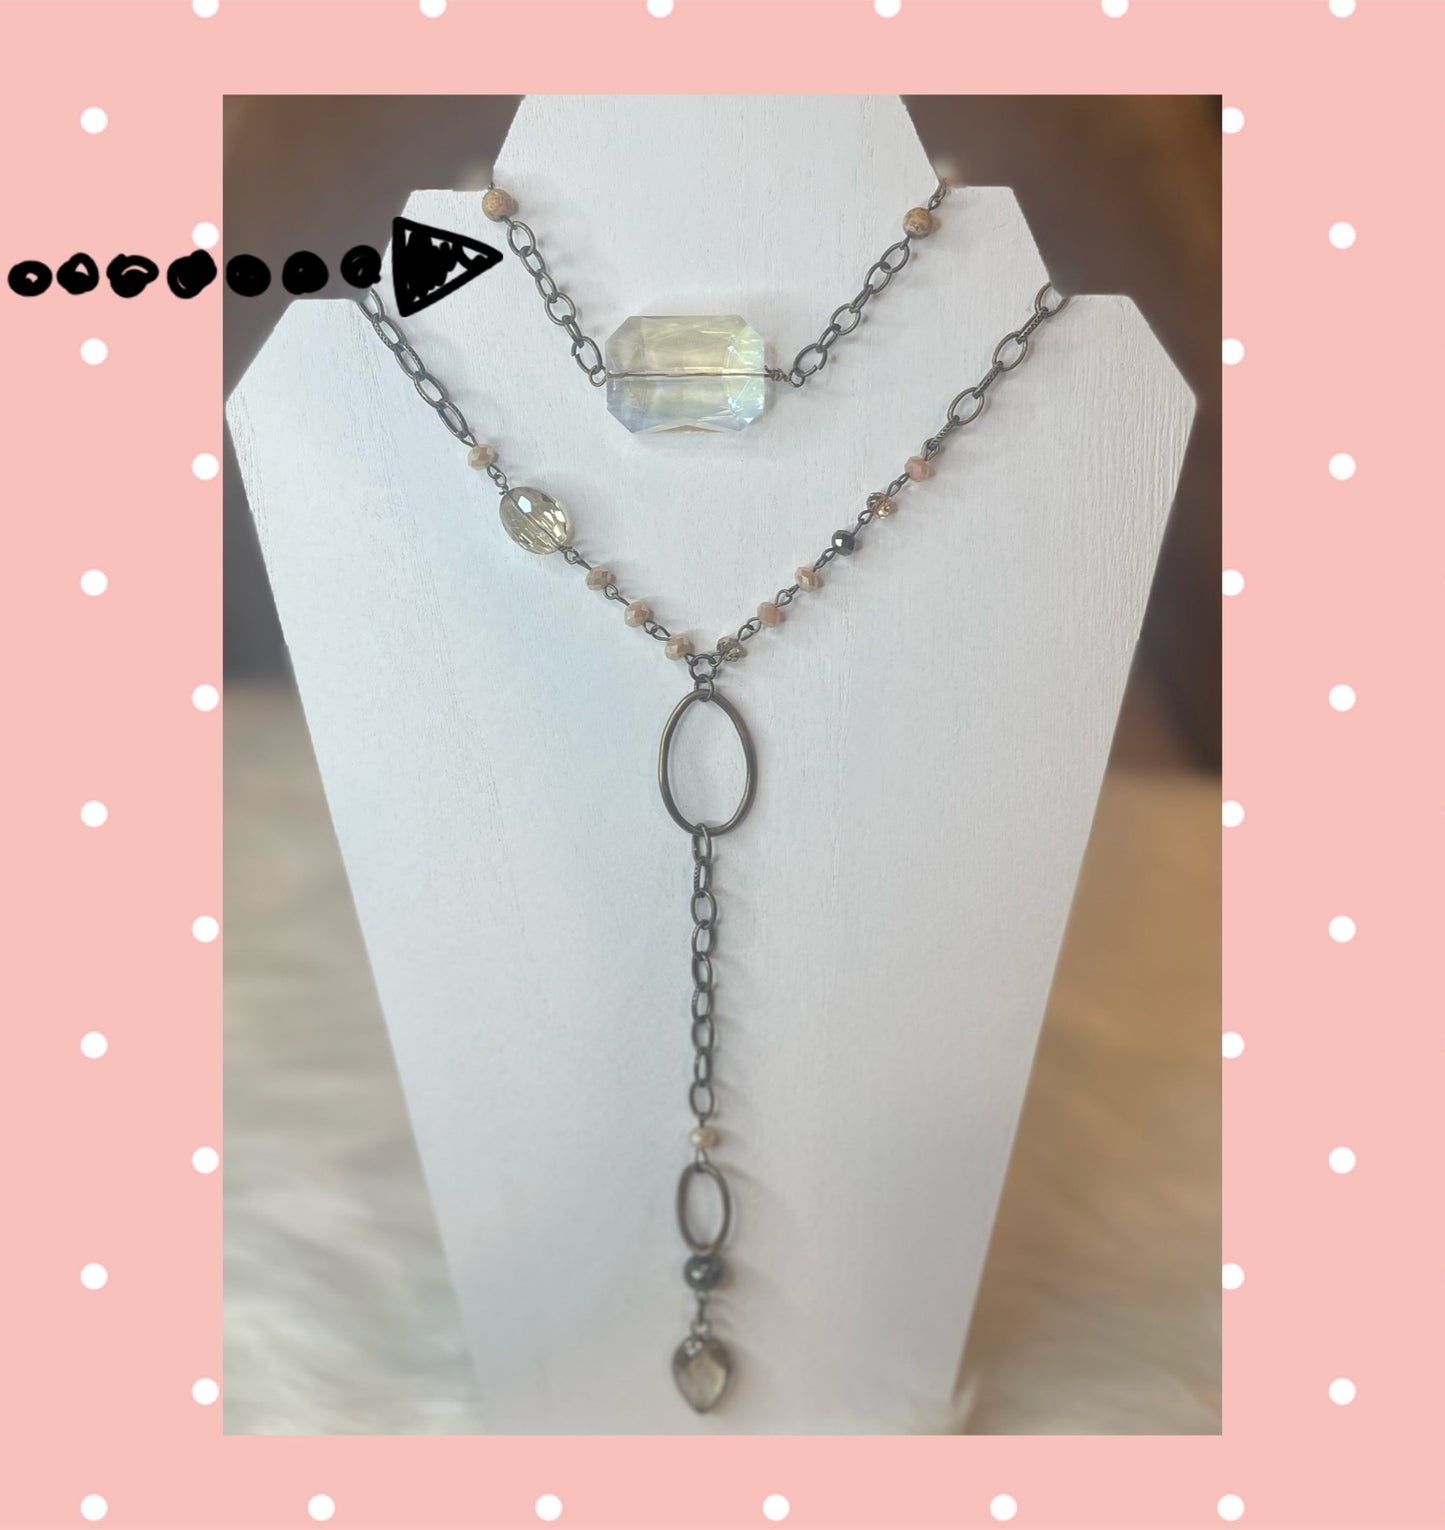 Gorgeous faceted crystal glass with gemstone beads and antiqued brass chain